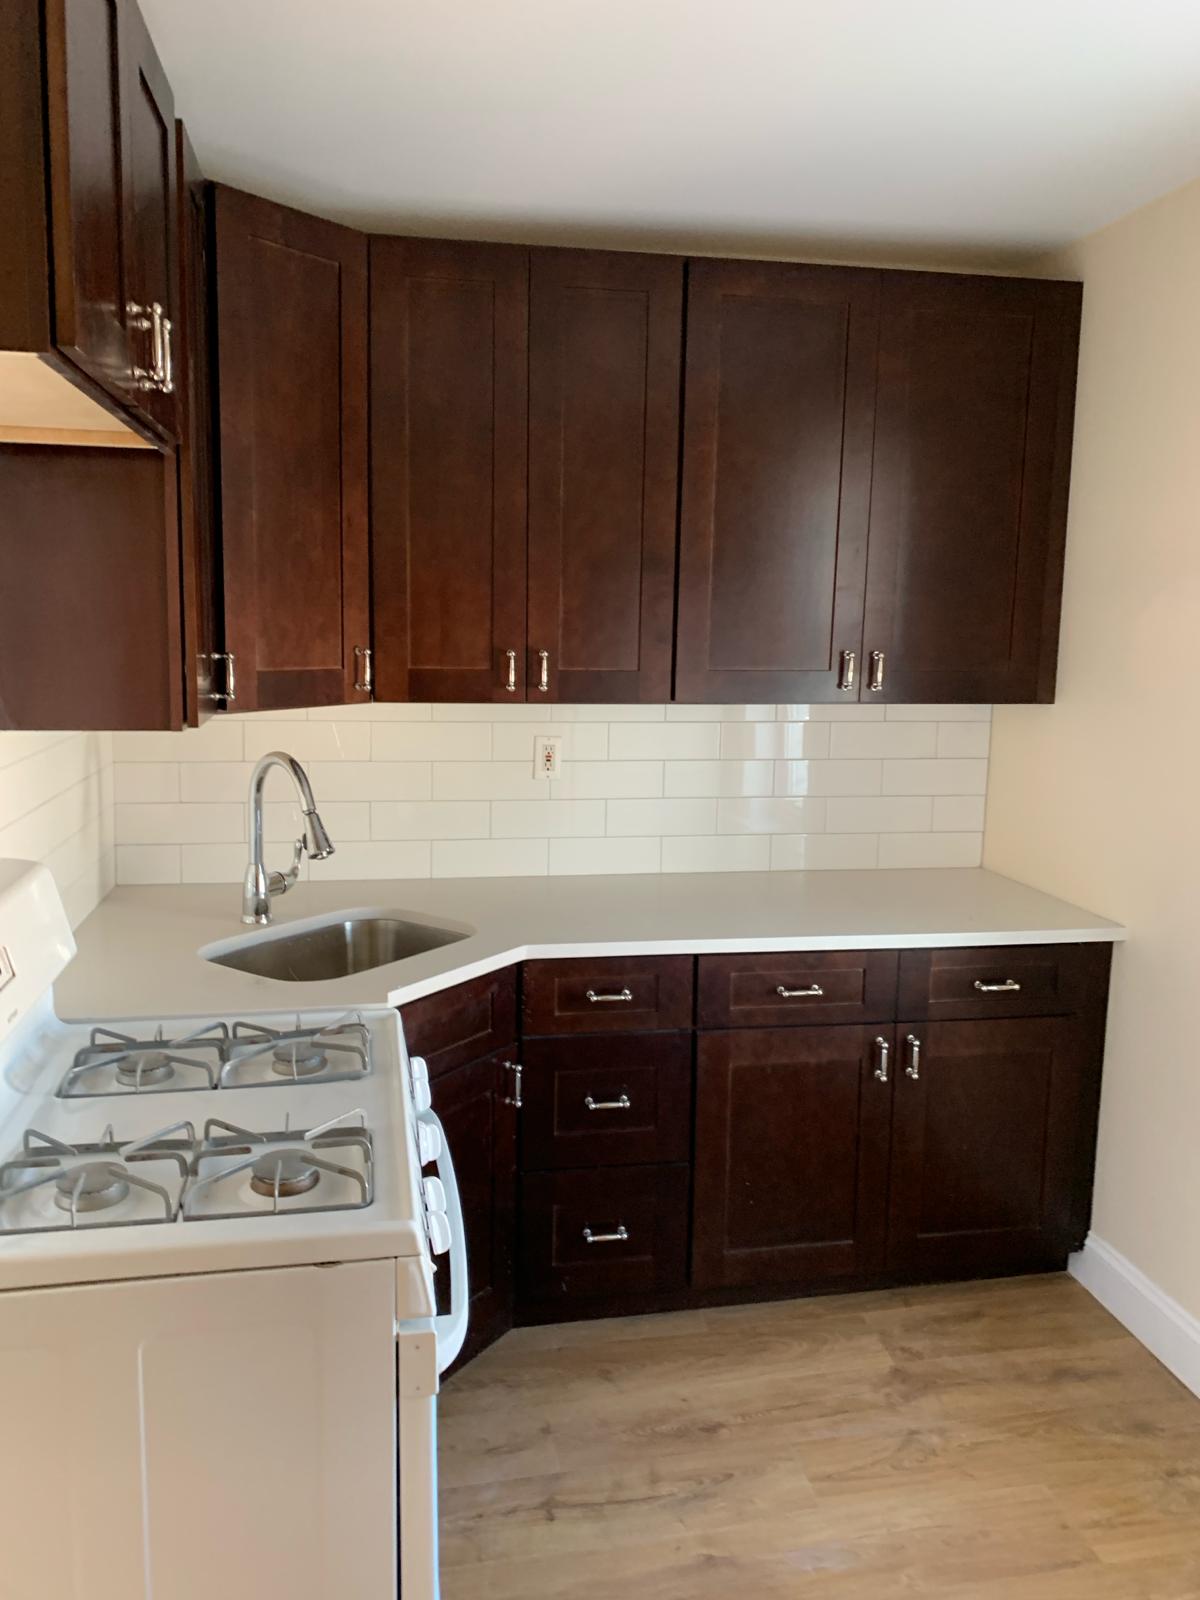 Clean and refurbished kitchen with dark brown cabinets and white tiles.